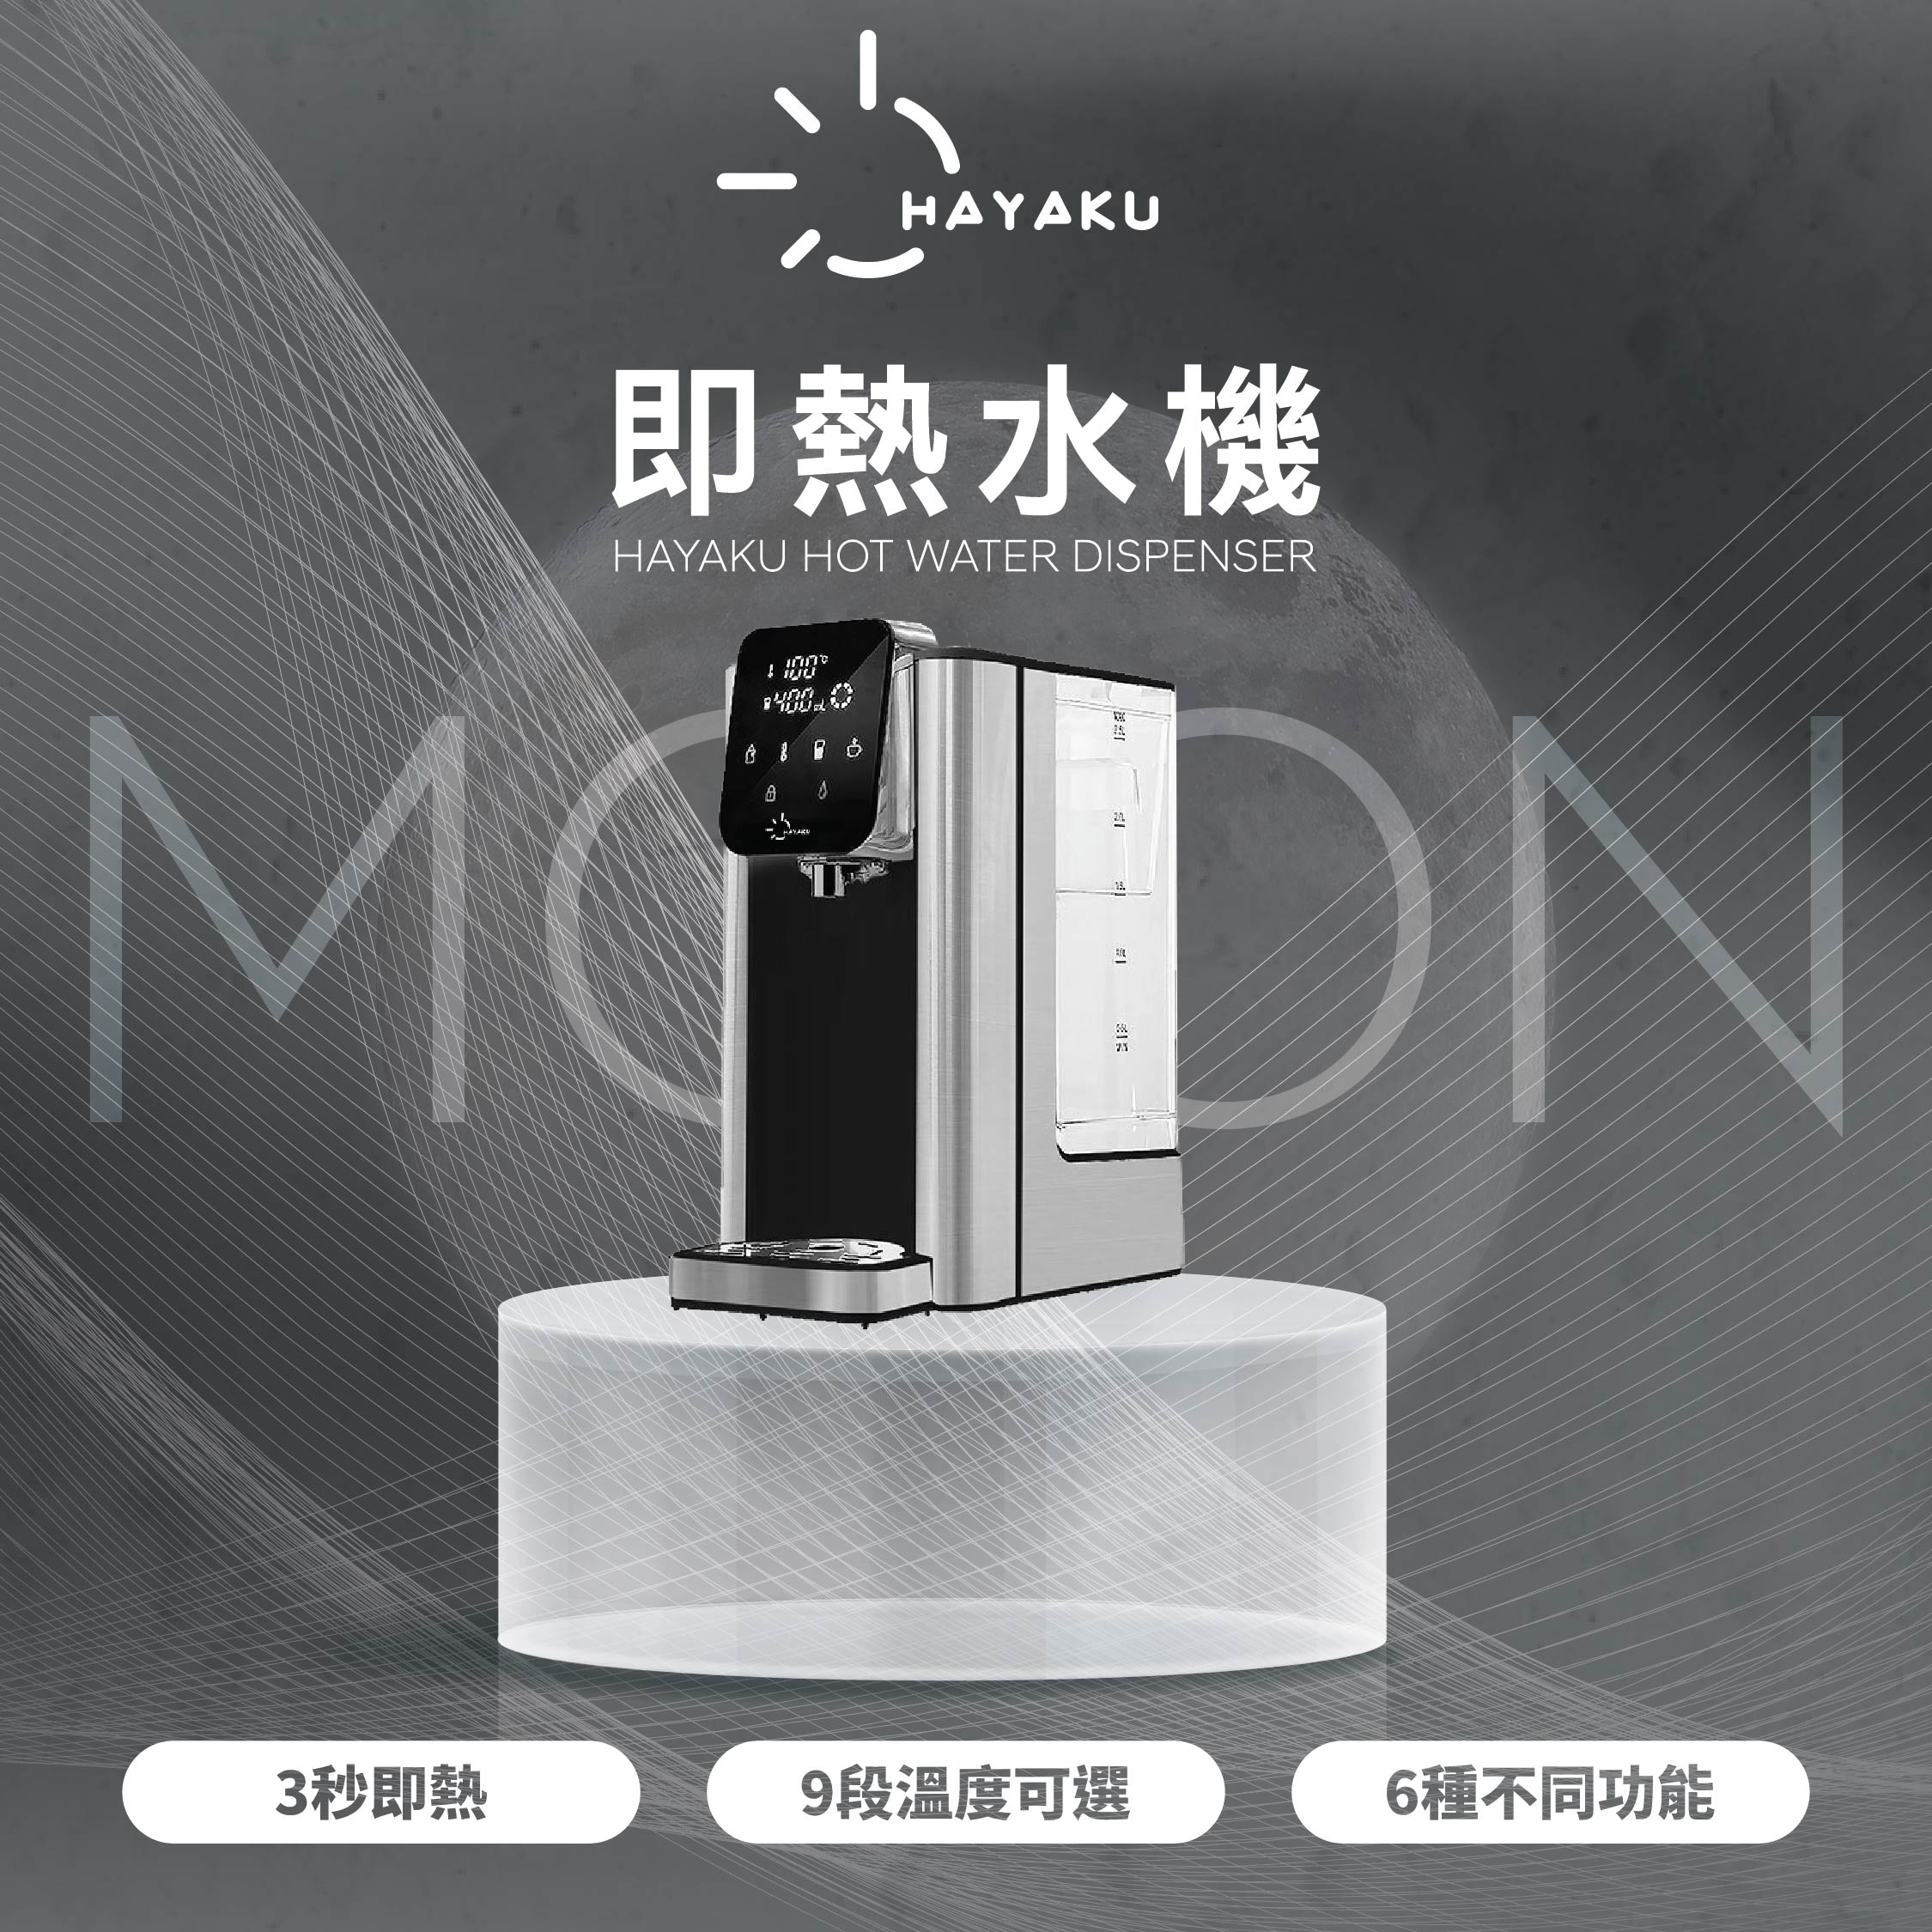 Hayaku Moon Instant Water Purifier (4L) Instant Hot Water Machine Free Installation Japanese Style Lifestyle Small Appliances